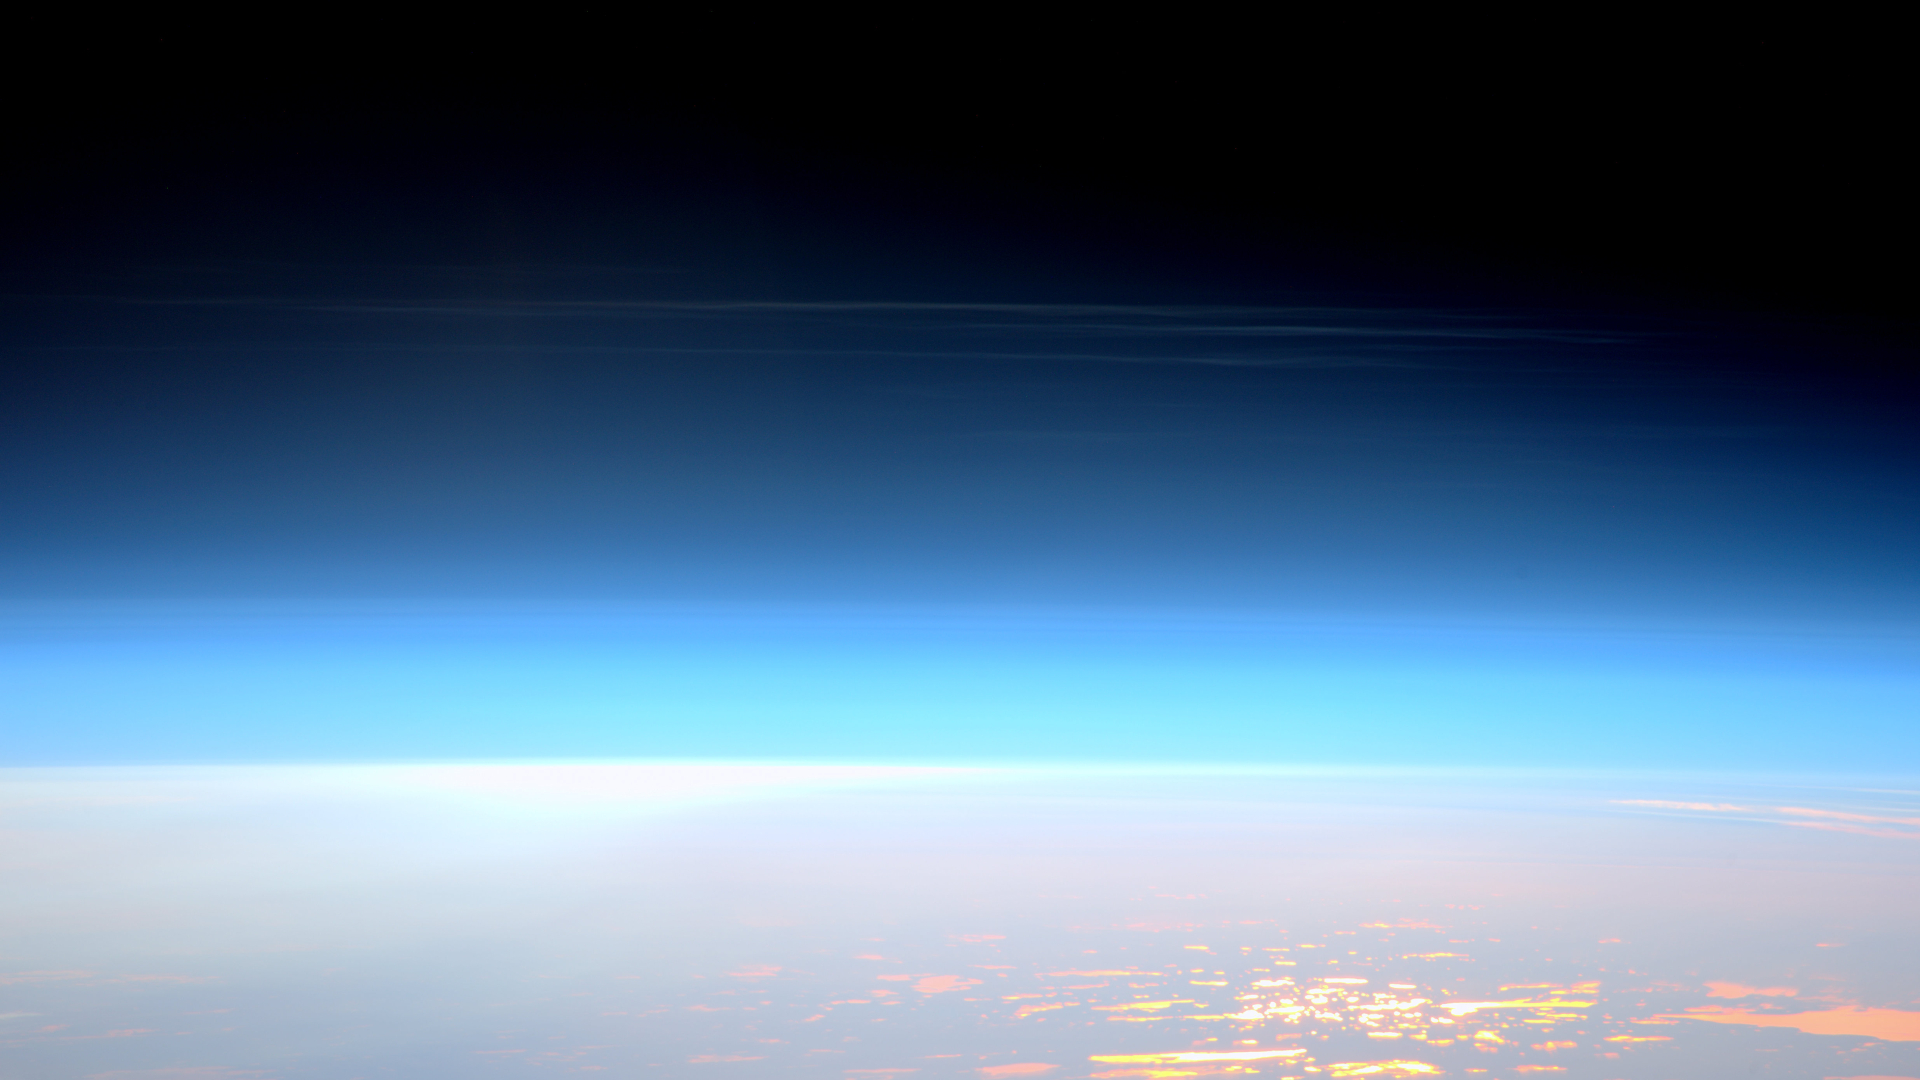 Thin white wispy clouds high in Earth's hazy blue atmosphere with Earth's surface below.